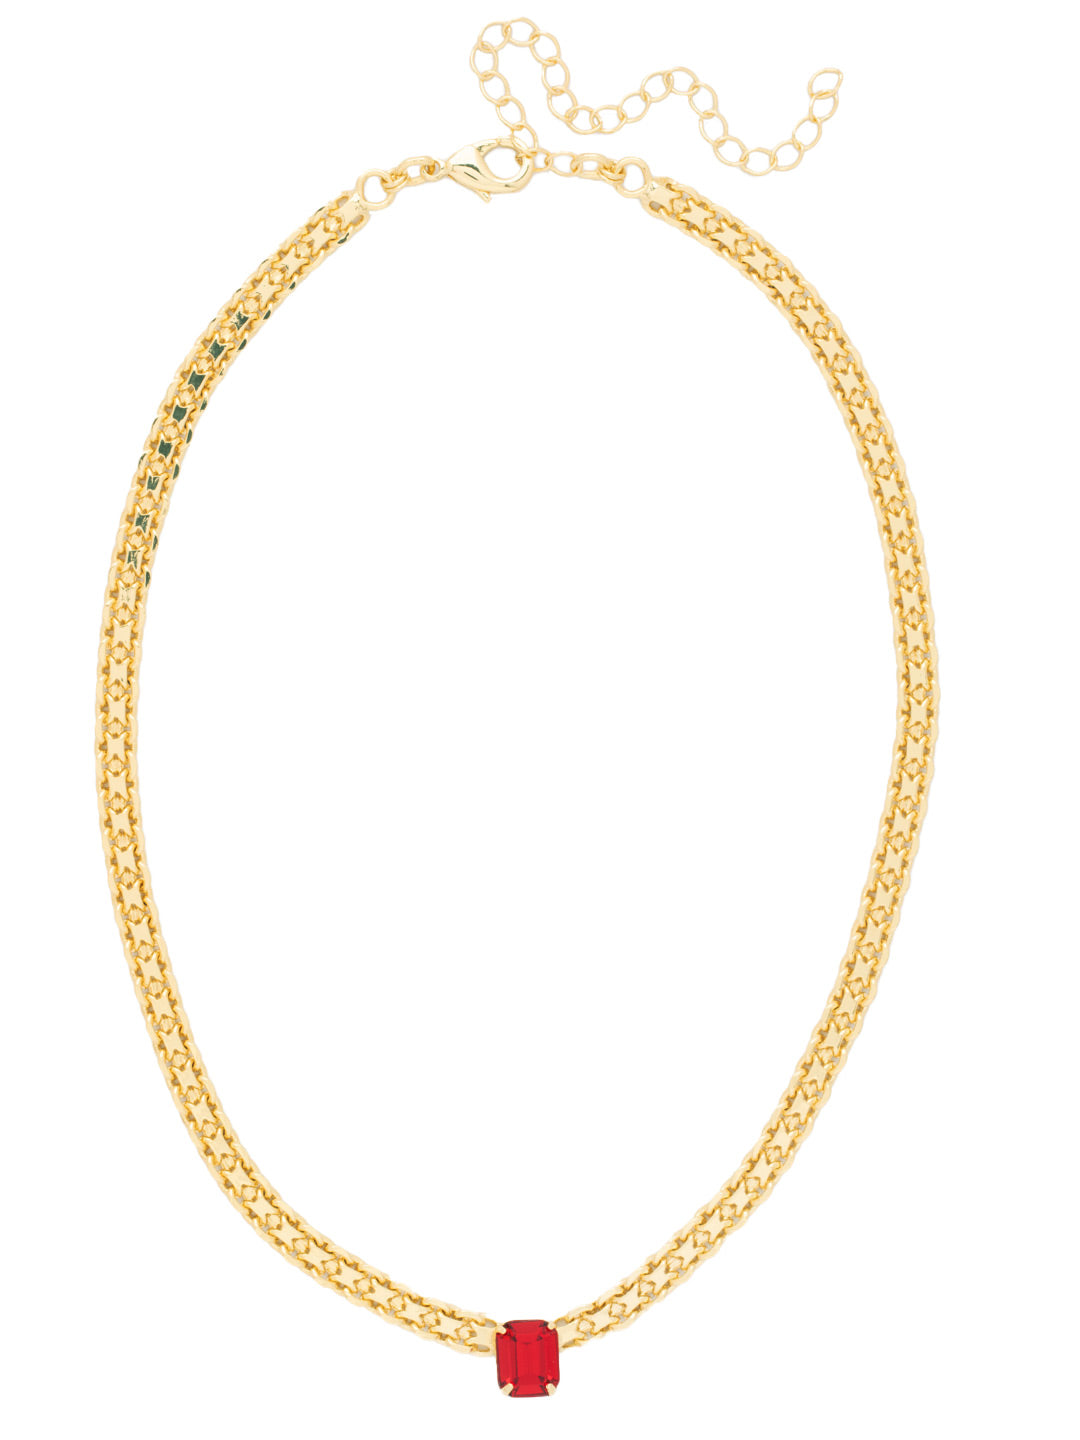 Octavia Tennis Necklace - NFK6BGFIS - <p>The Octavia Tennis Necklace features a single petite emerald cut crystal on an adjustable chain, secured with a lobster claw clasp. From Sorrelli's Fireside collection in our Bright Gold-tone finish.</p>